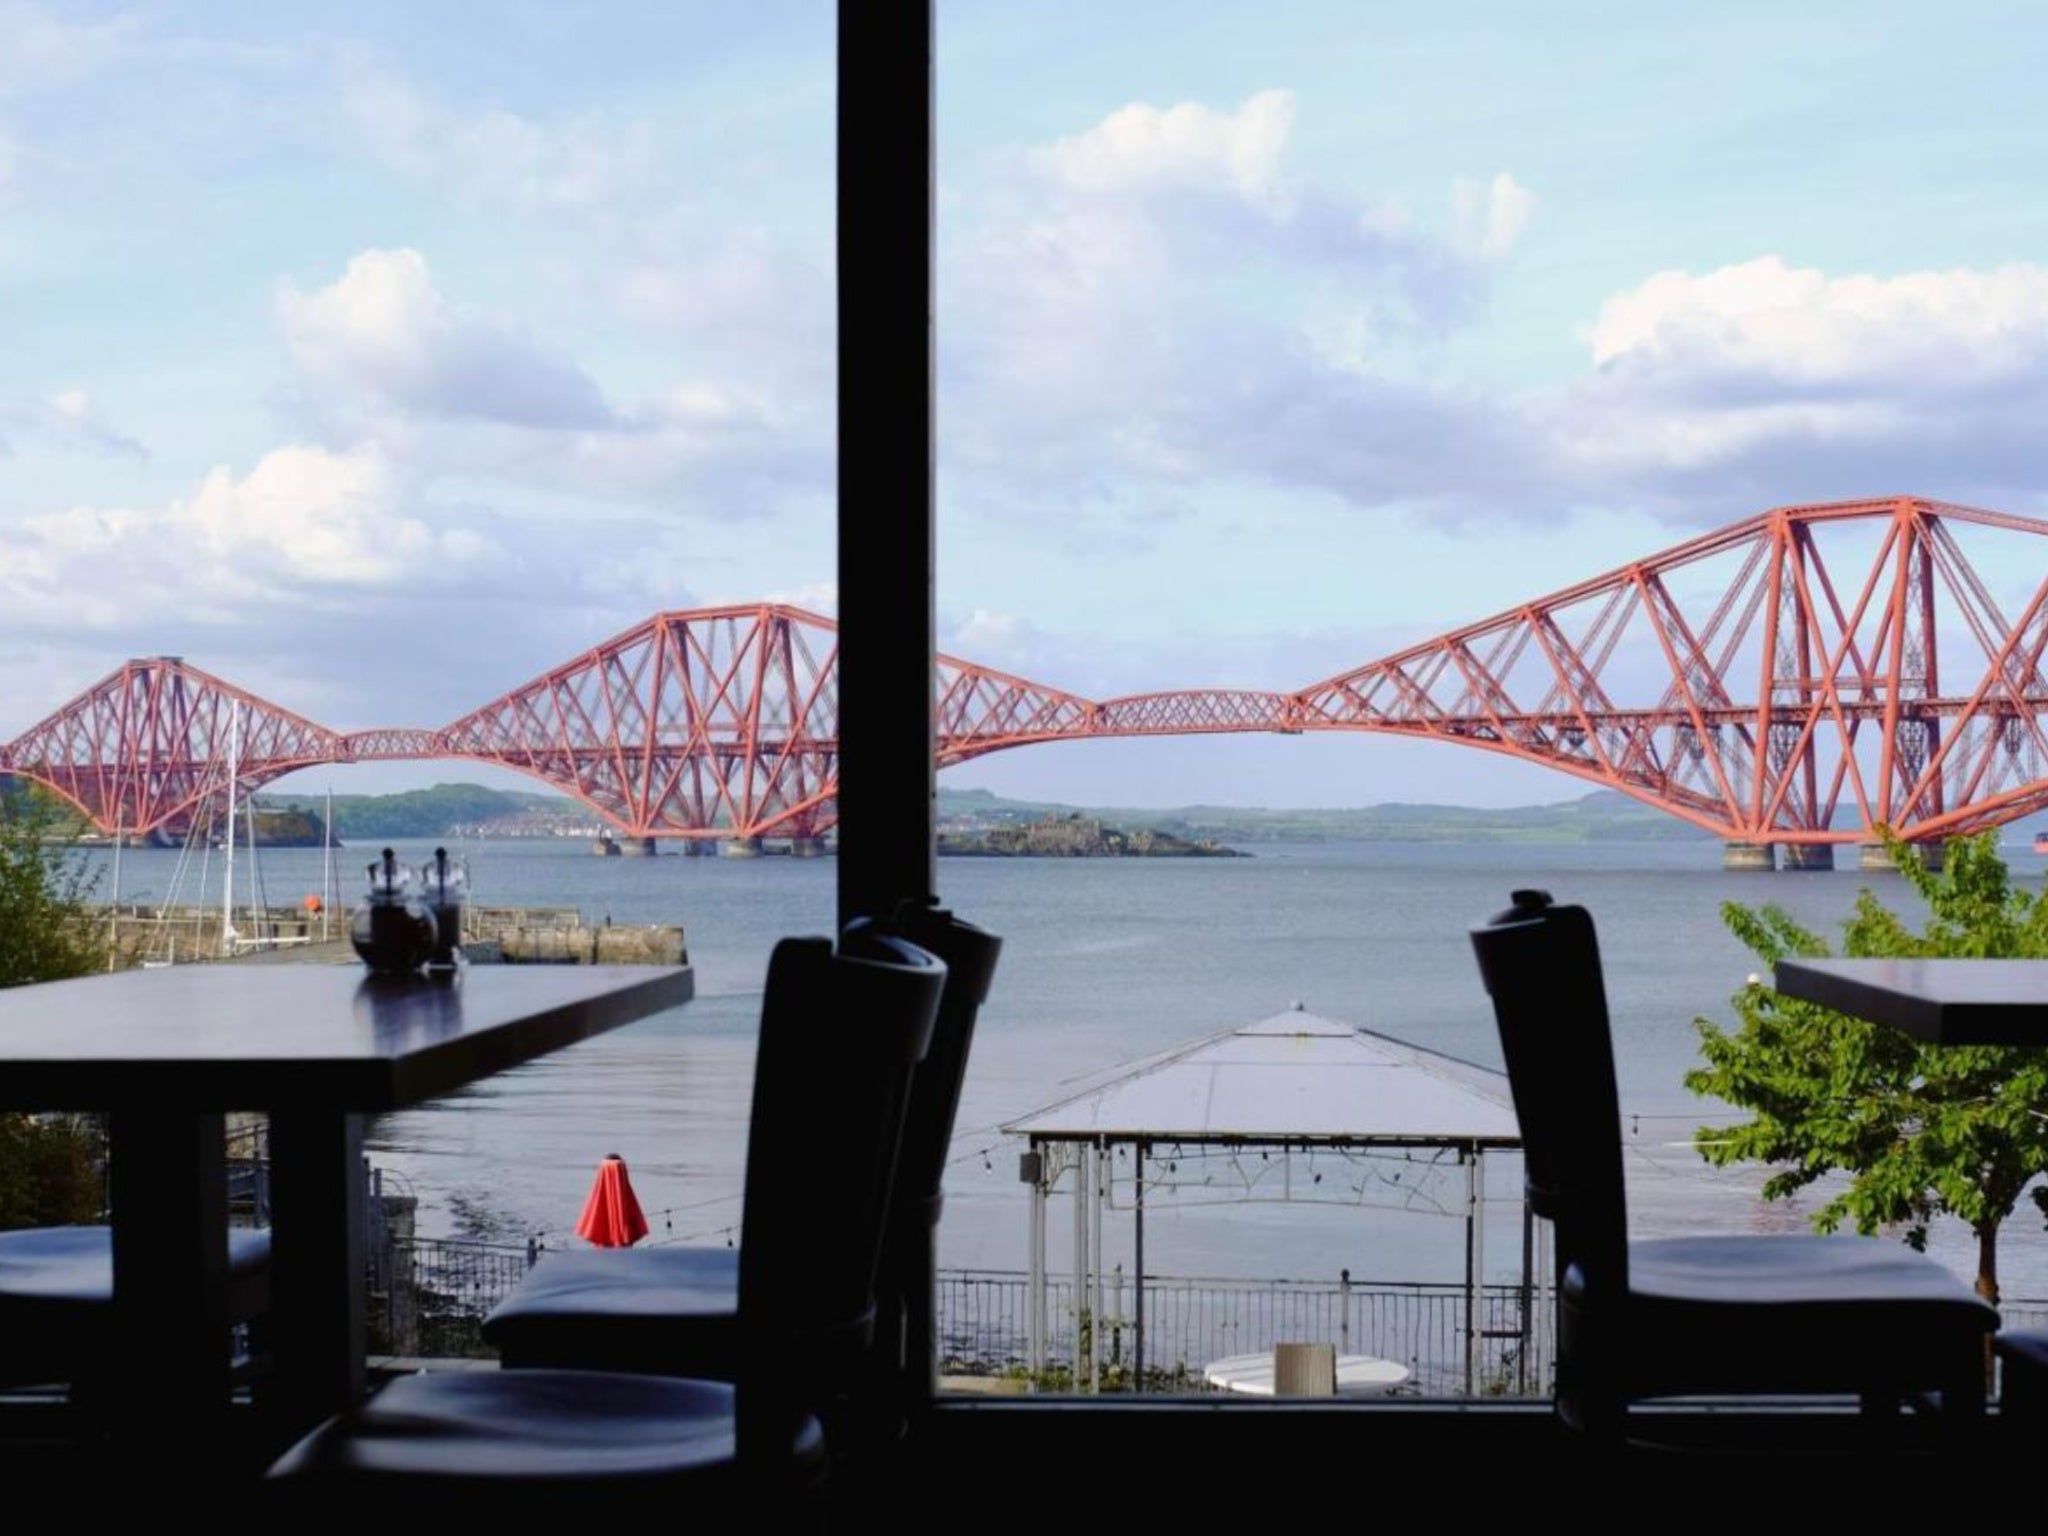 Enjoy views of the famous Forth Bridge from this cosy hotel